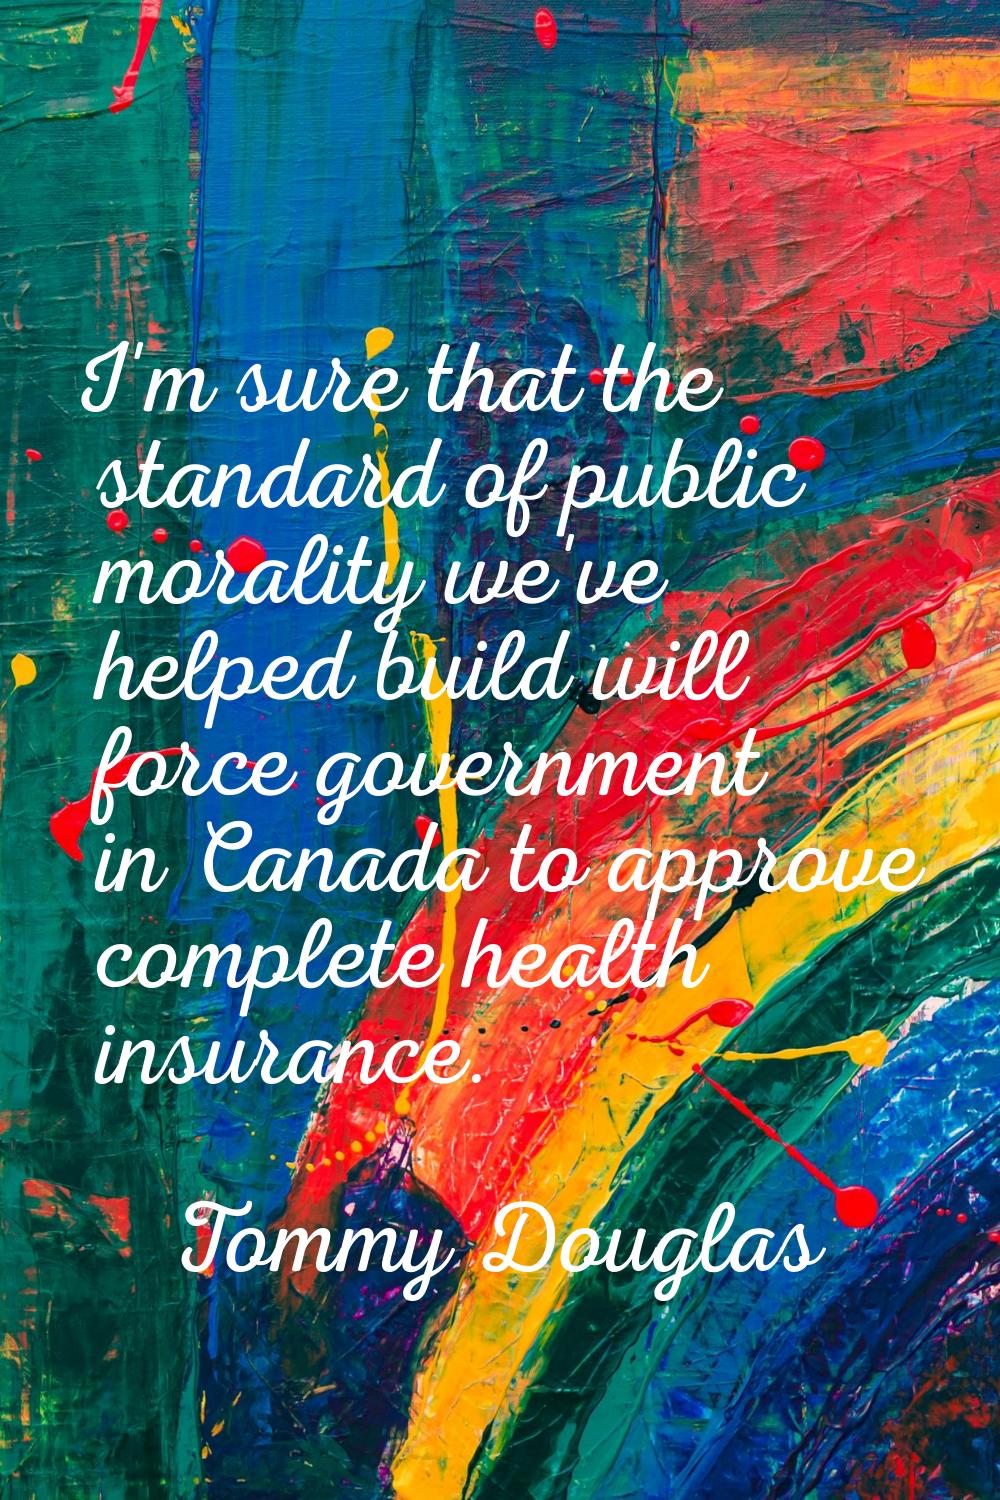 I'm sure that the standard of public morality we've helped build will force government in Canada to